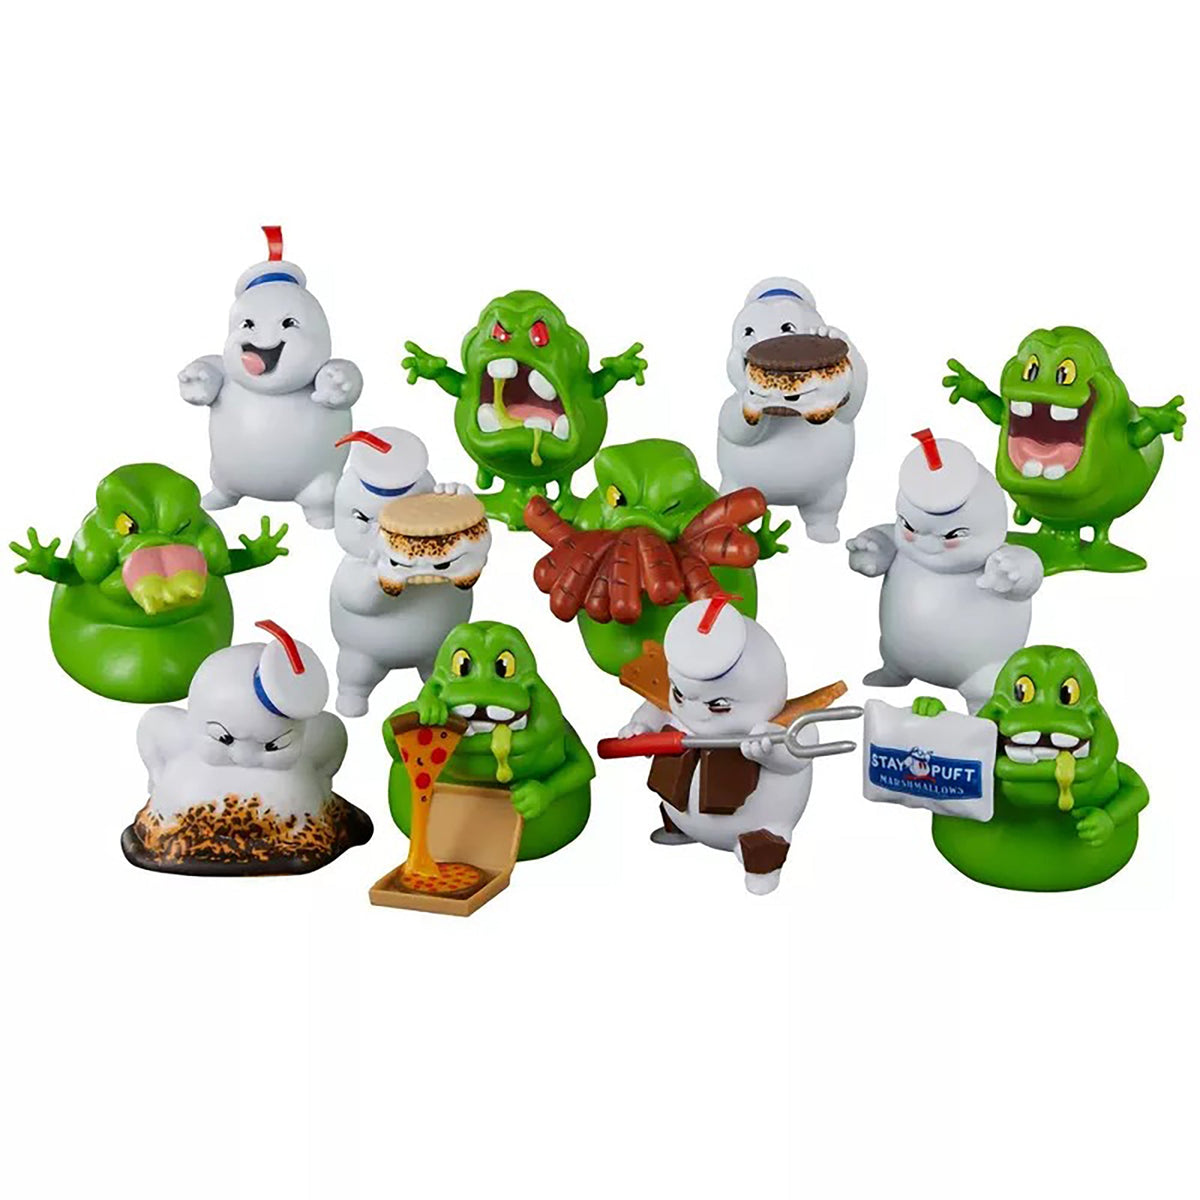 HASBRO Toys & Games Ghostbusters Collectible Figurine, Assortment, 1 Count